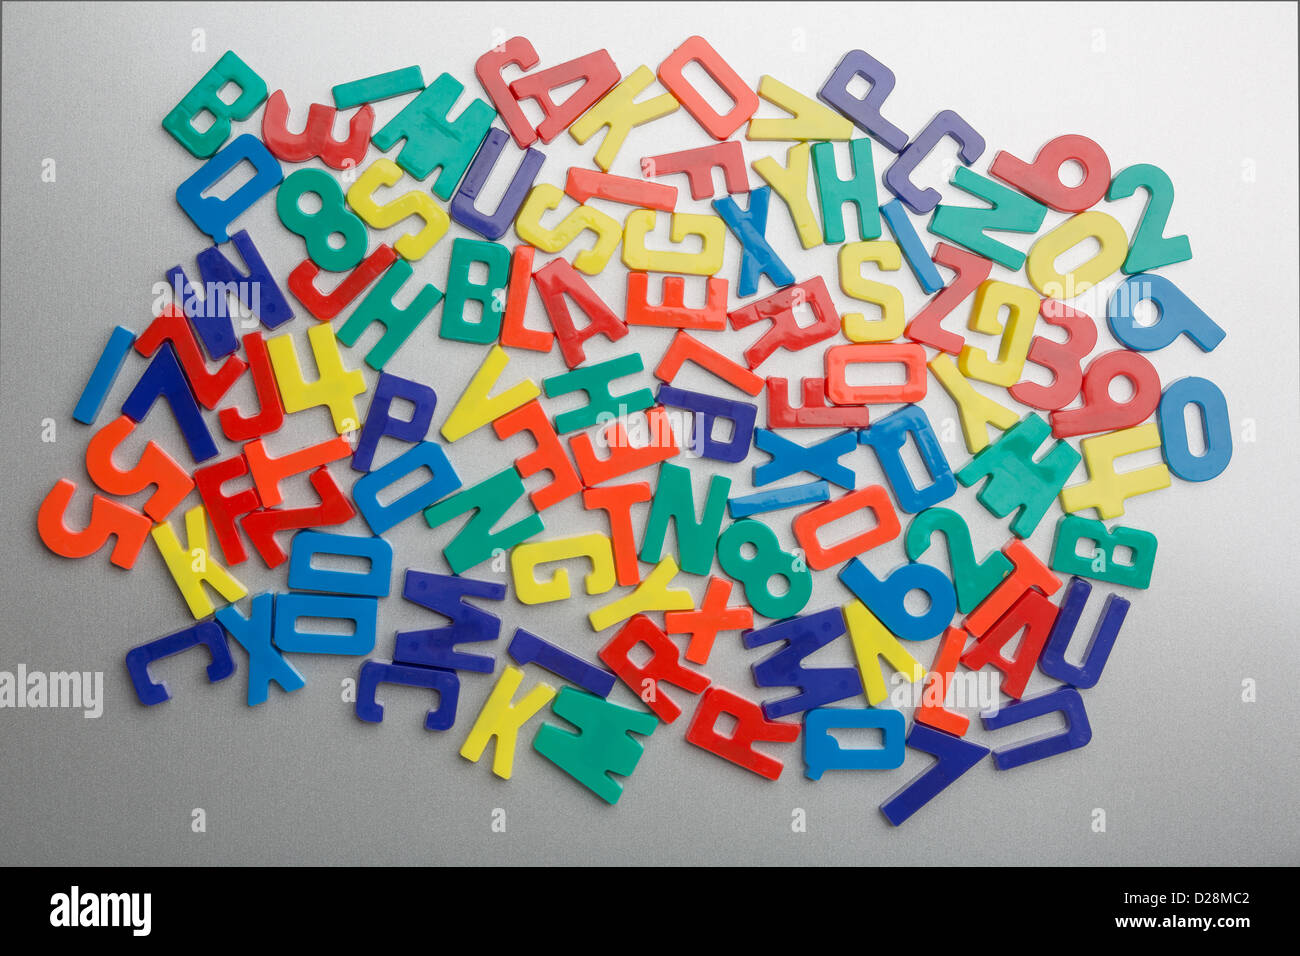 Refrigerator magnet letters jumbled up in a random pattern Stock Photo